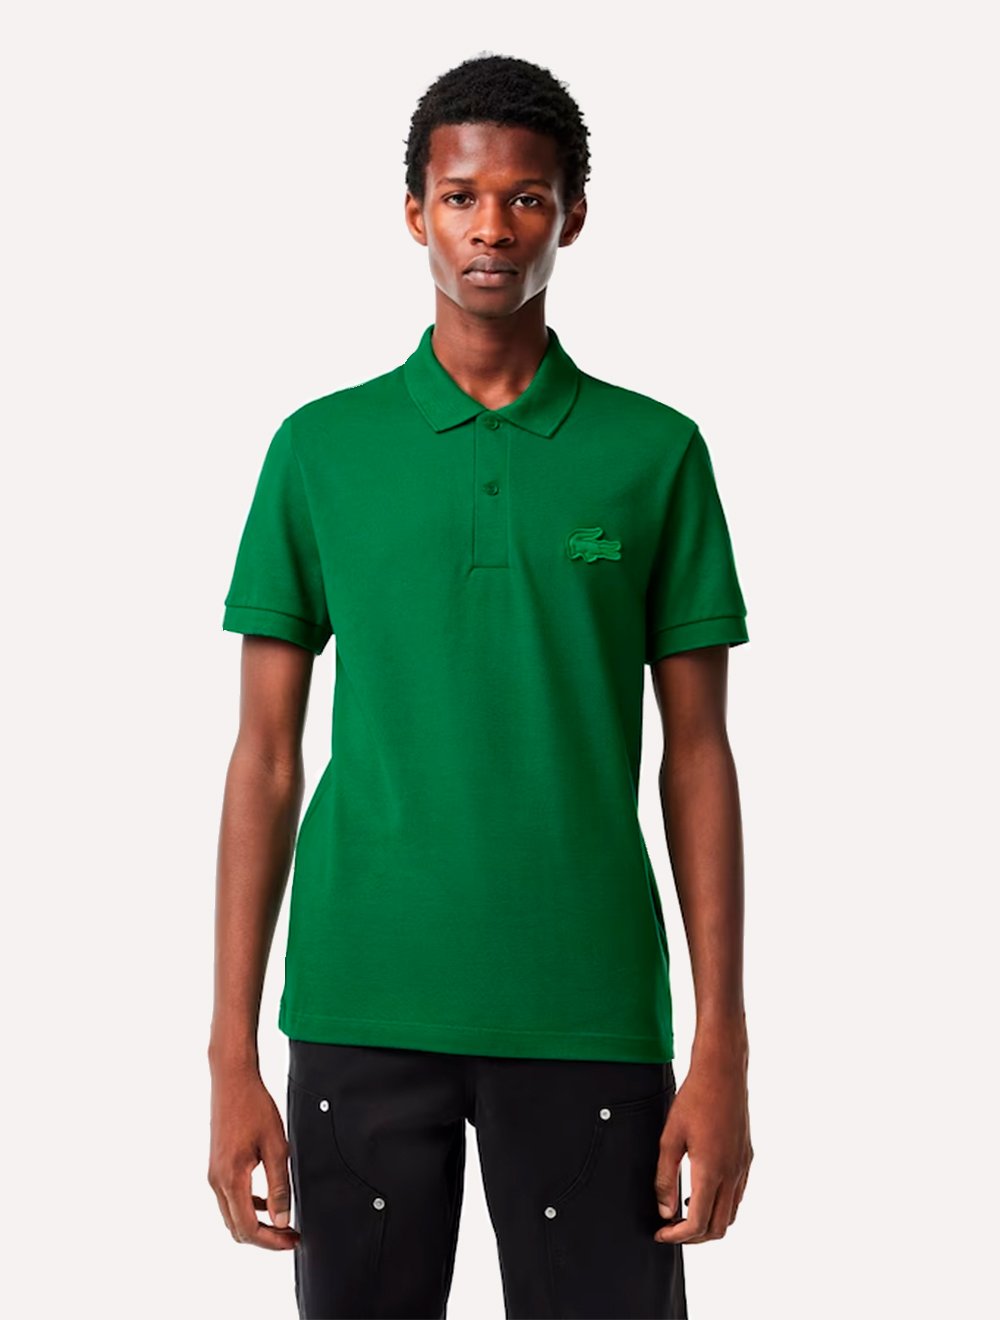 Polo Lacoste Masculina Regular Piquet Quilted Crocodile Badge Verde